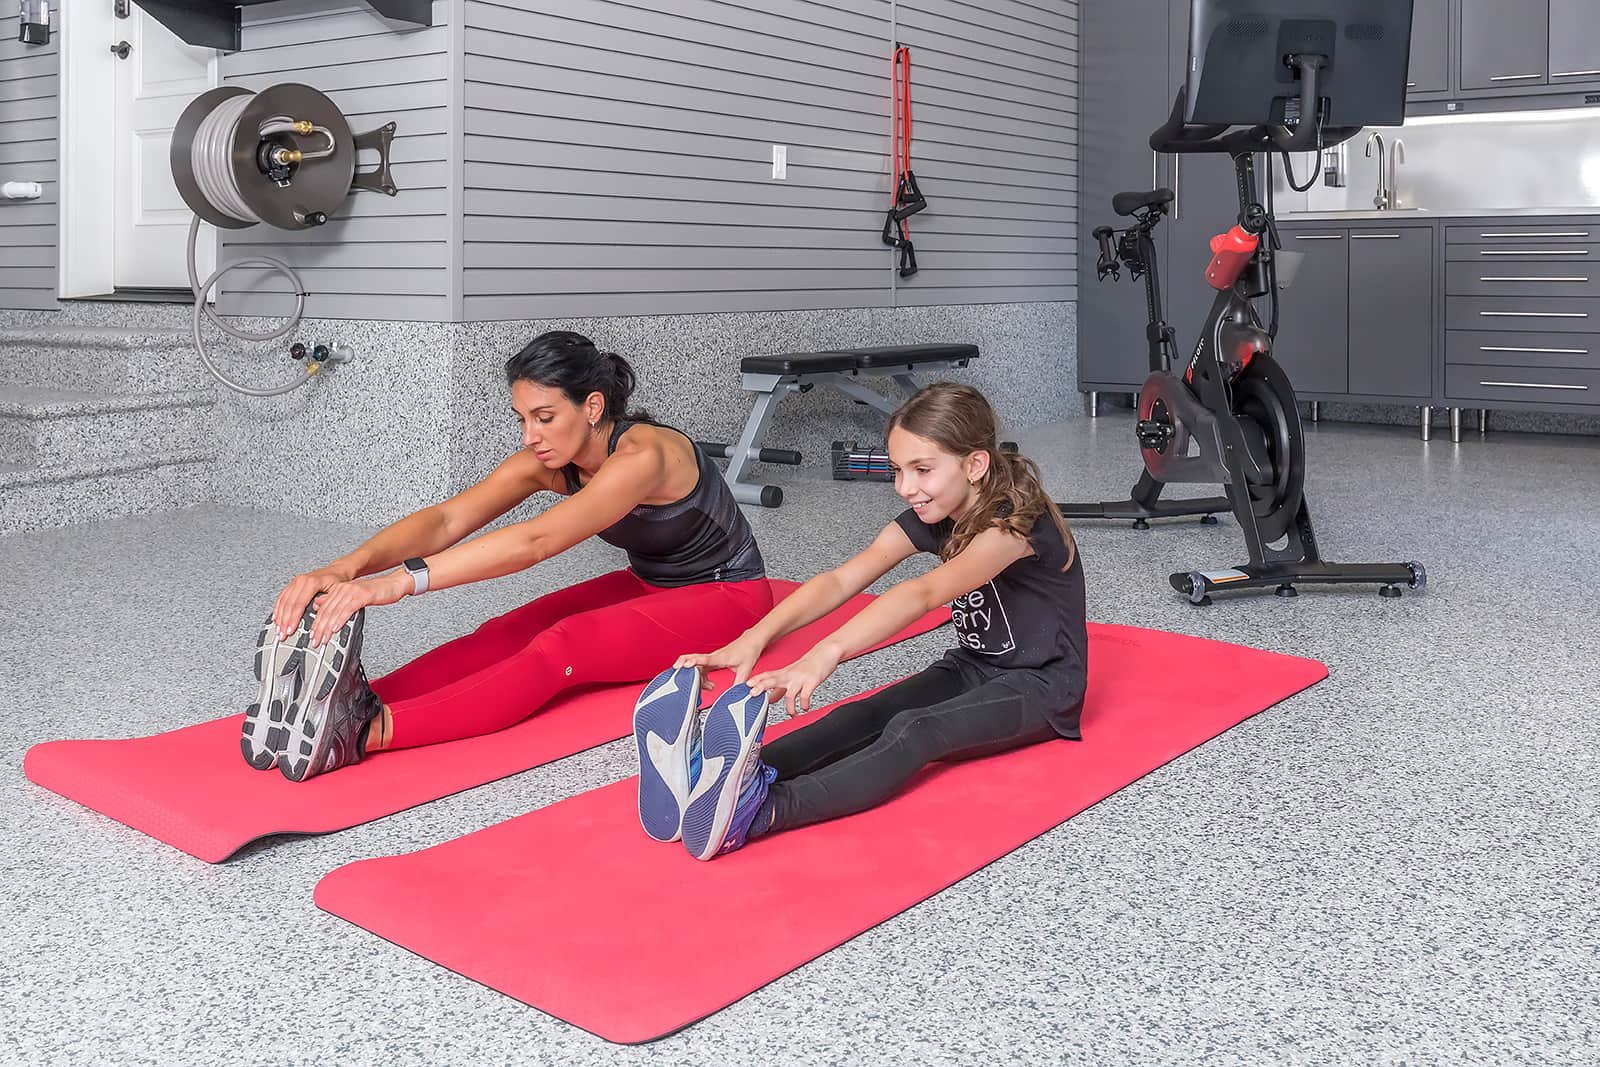 xmother-daughter-stretching-red-exercise-mats-fitness-room-garage.jpg.pagespeed.ic.woPIF5NGCa